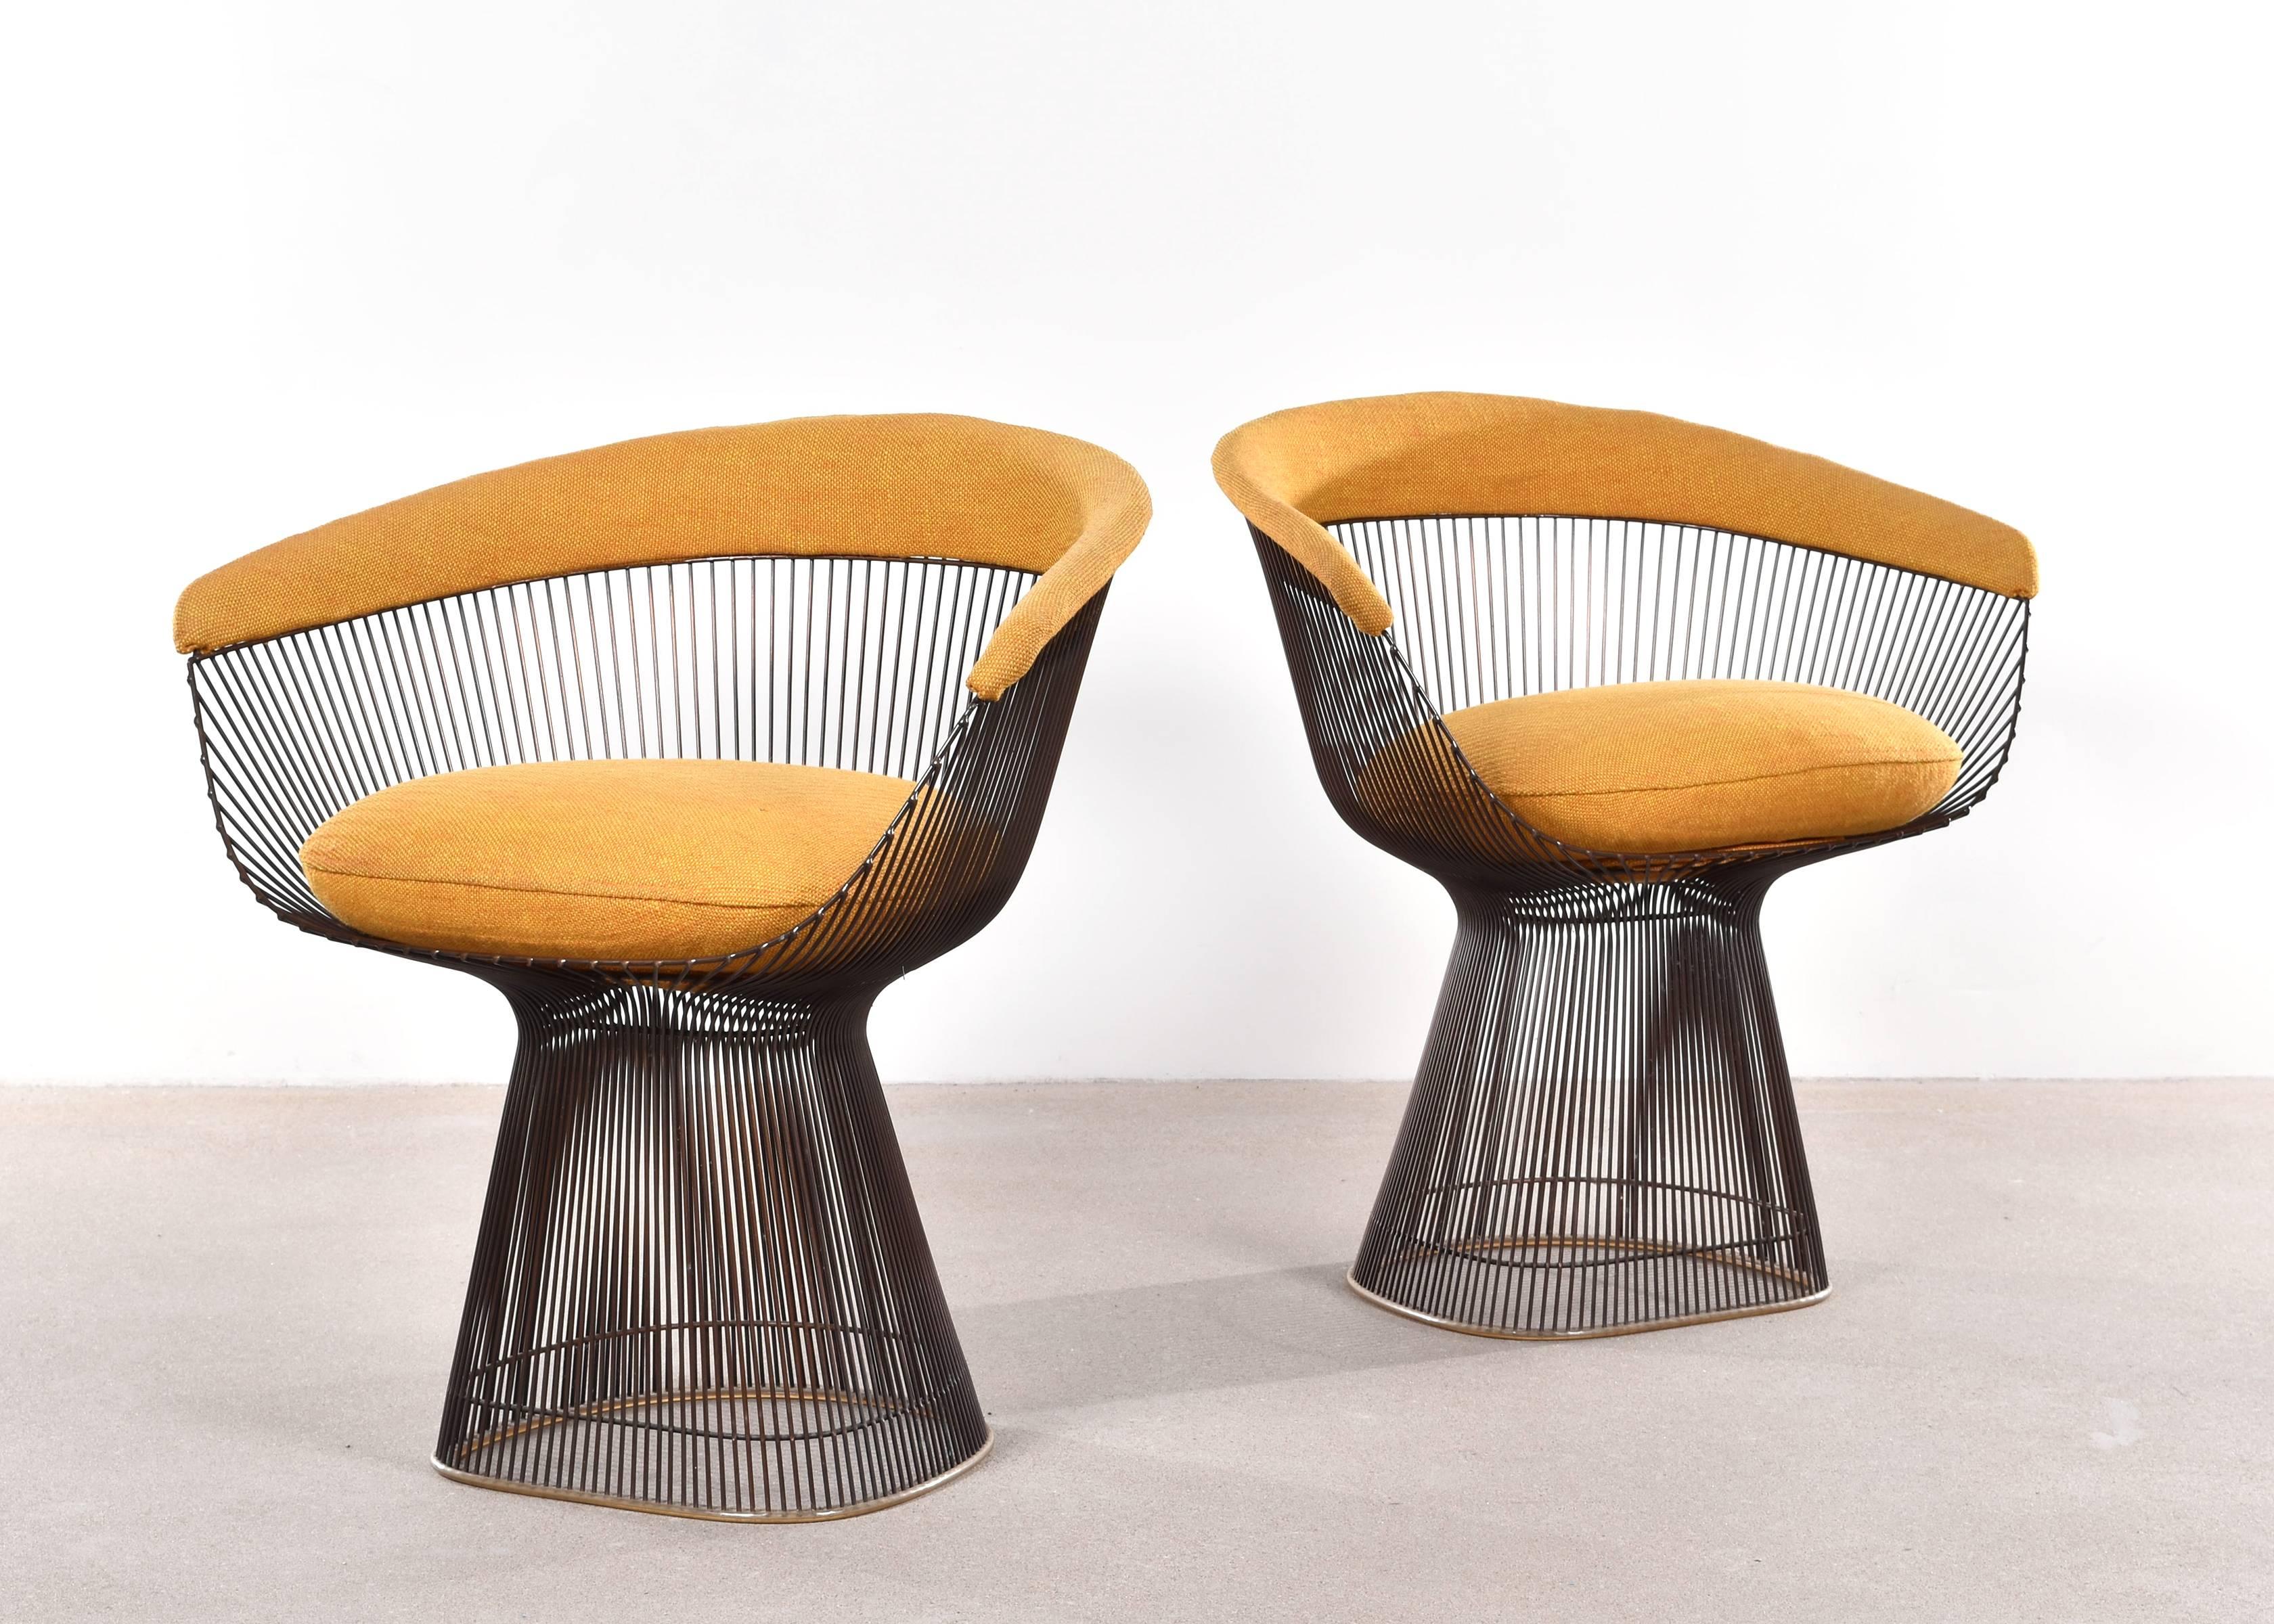 Elegant dining chairs (model 1725A) designed by Warren Platner for Knoll.
Rare bronze frames in very good original condition. The chairs can be newly upholstered if desired, contact us for possibilities.

Free shipping for European